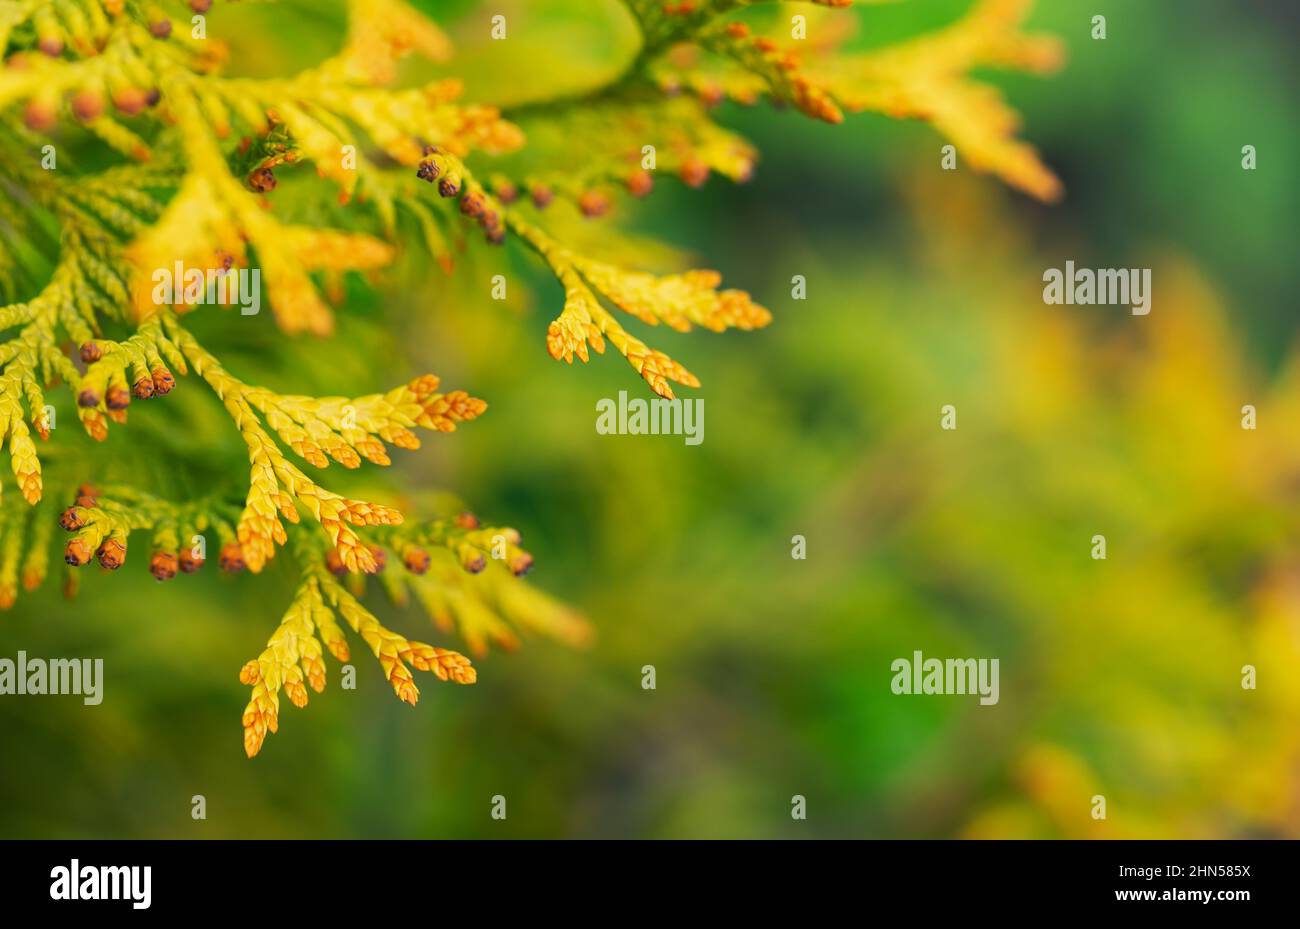 Branch of thuja on green blurred background with selective focus. Summer, autumn or gardening concept. Copy space for text. Stock Photo